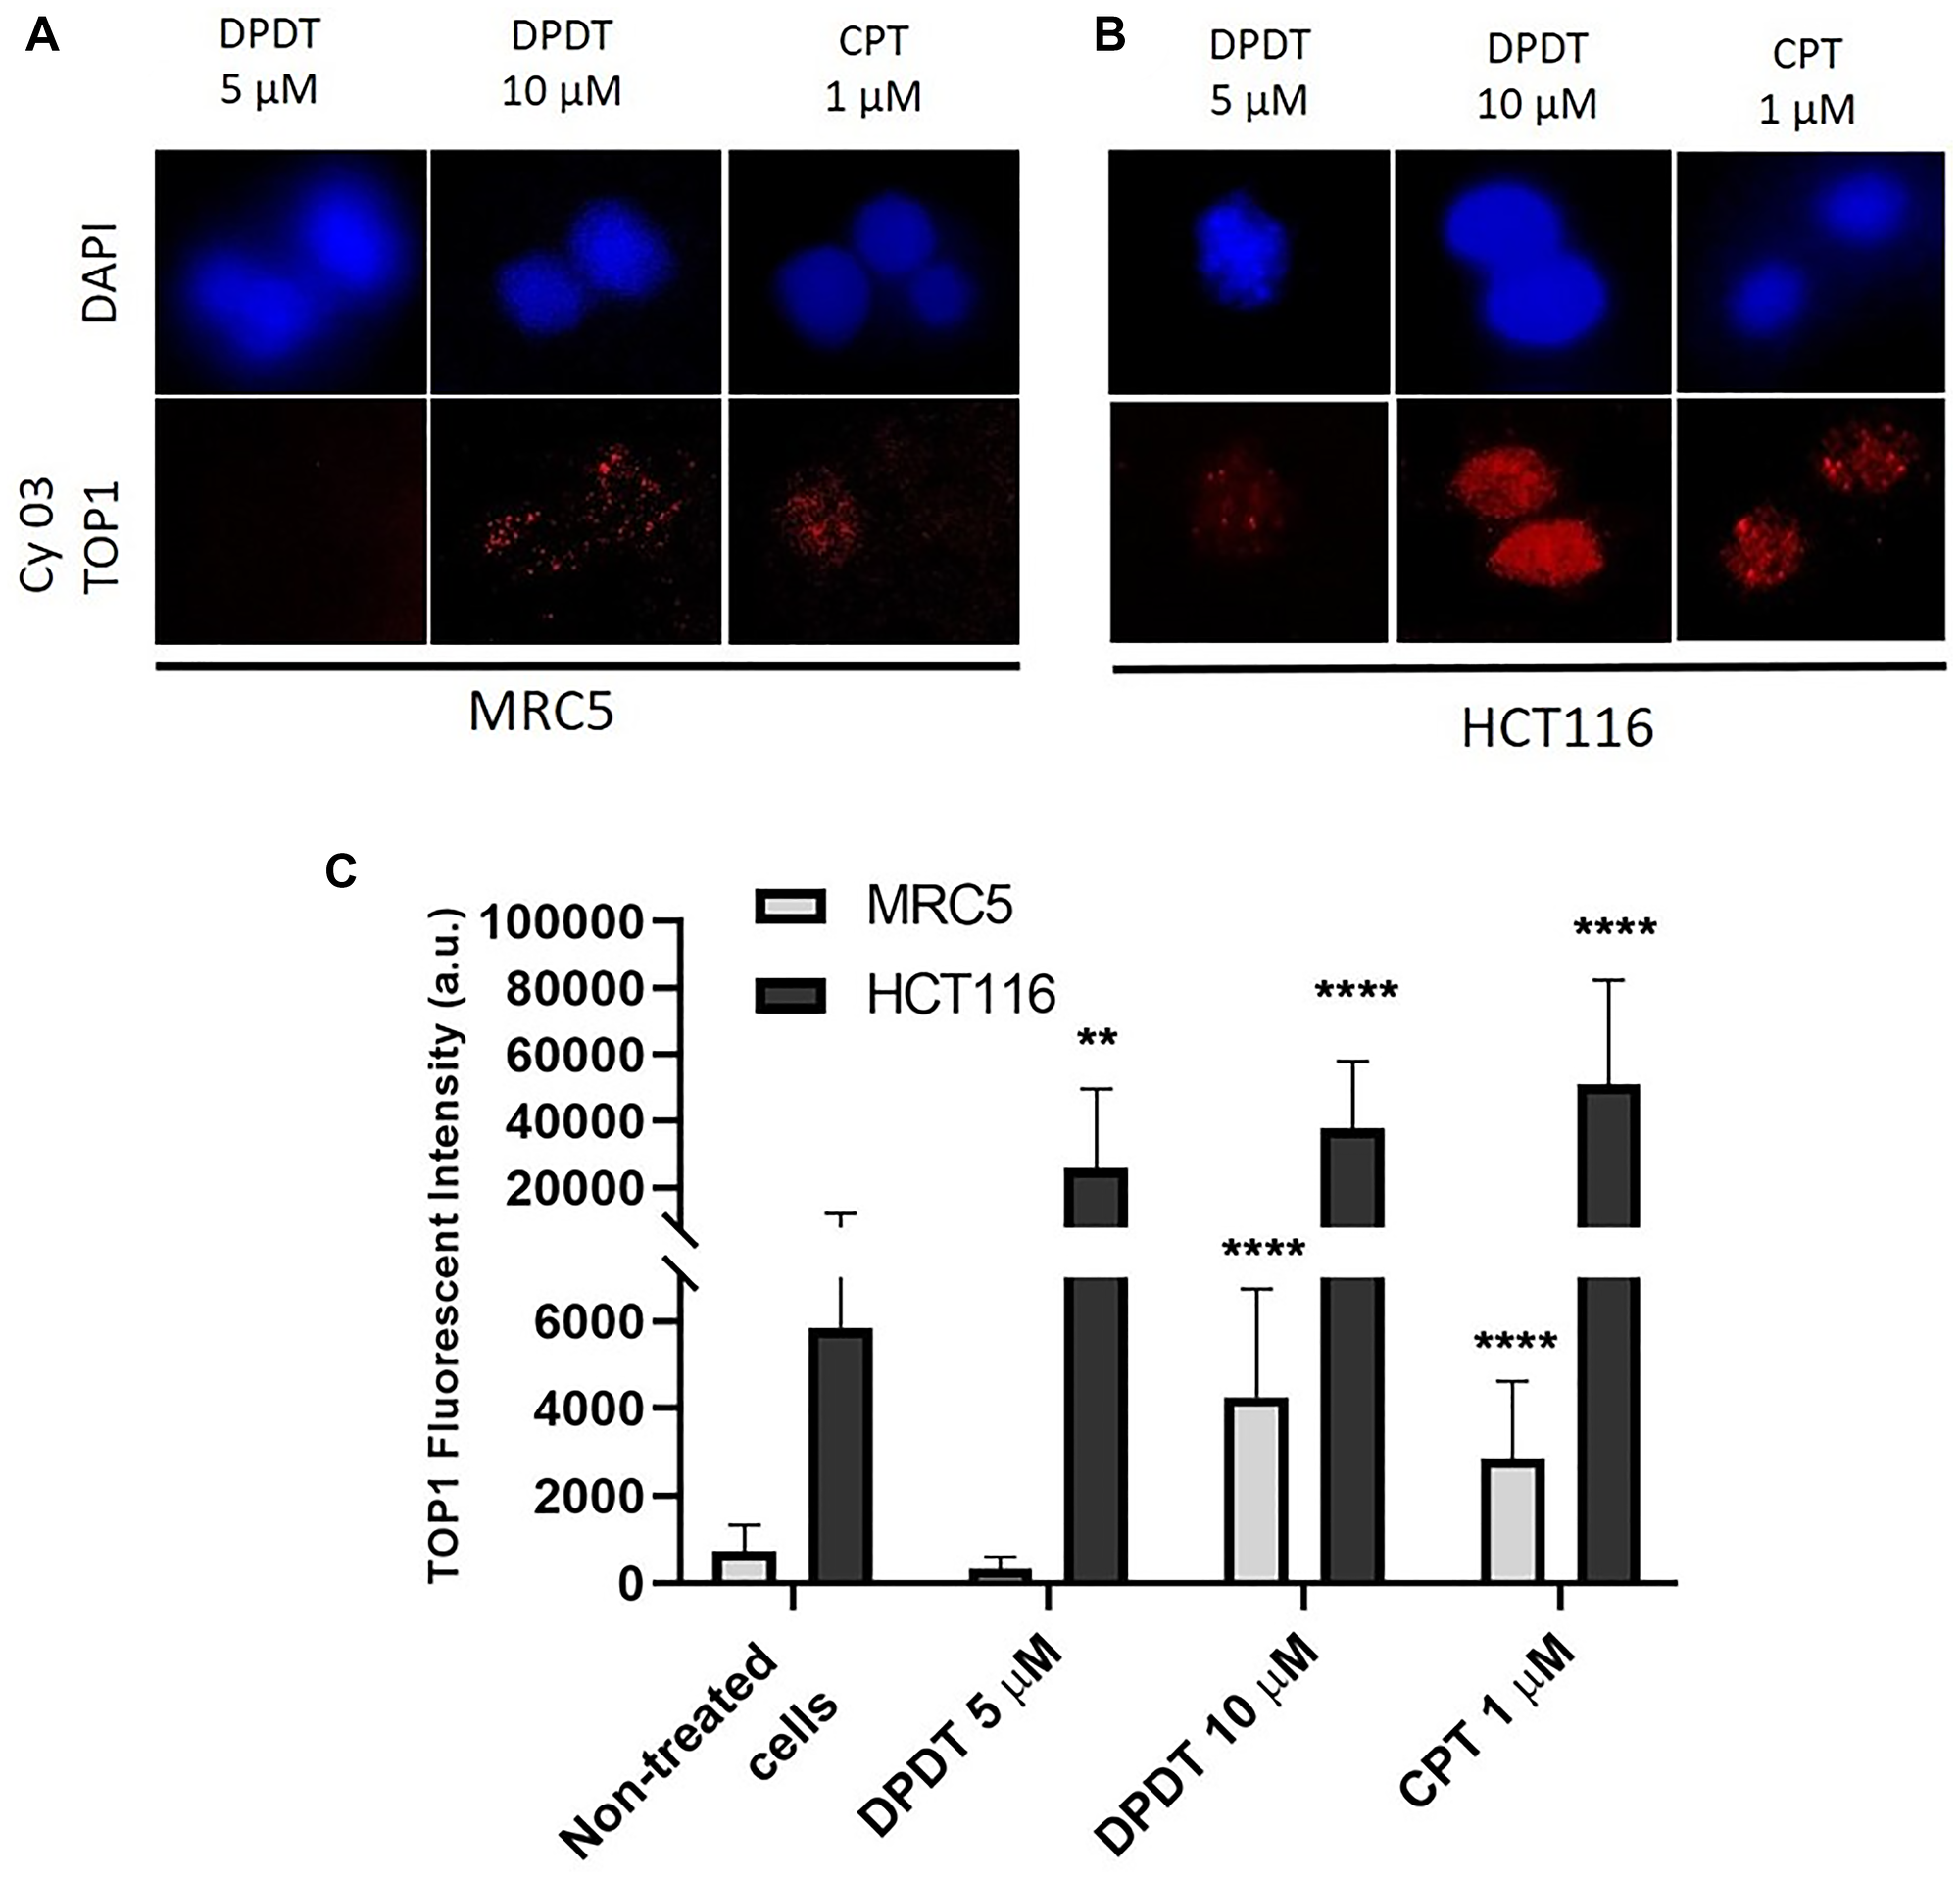 DPDT induces TOP I-DNA complexes in MRC5 and HCT116 cells (TARDIS assay).